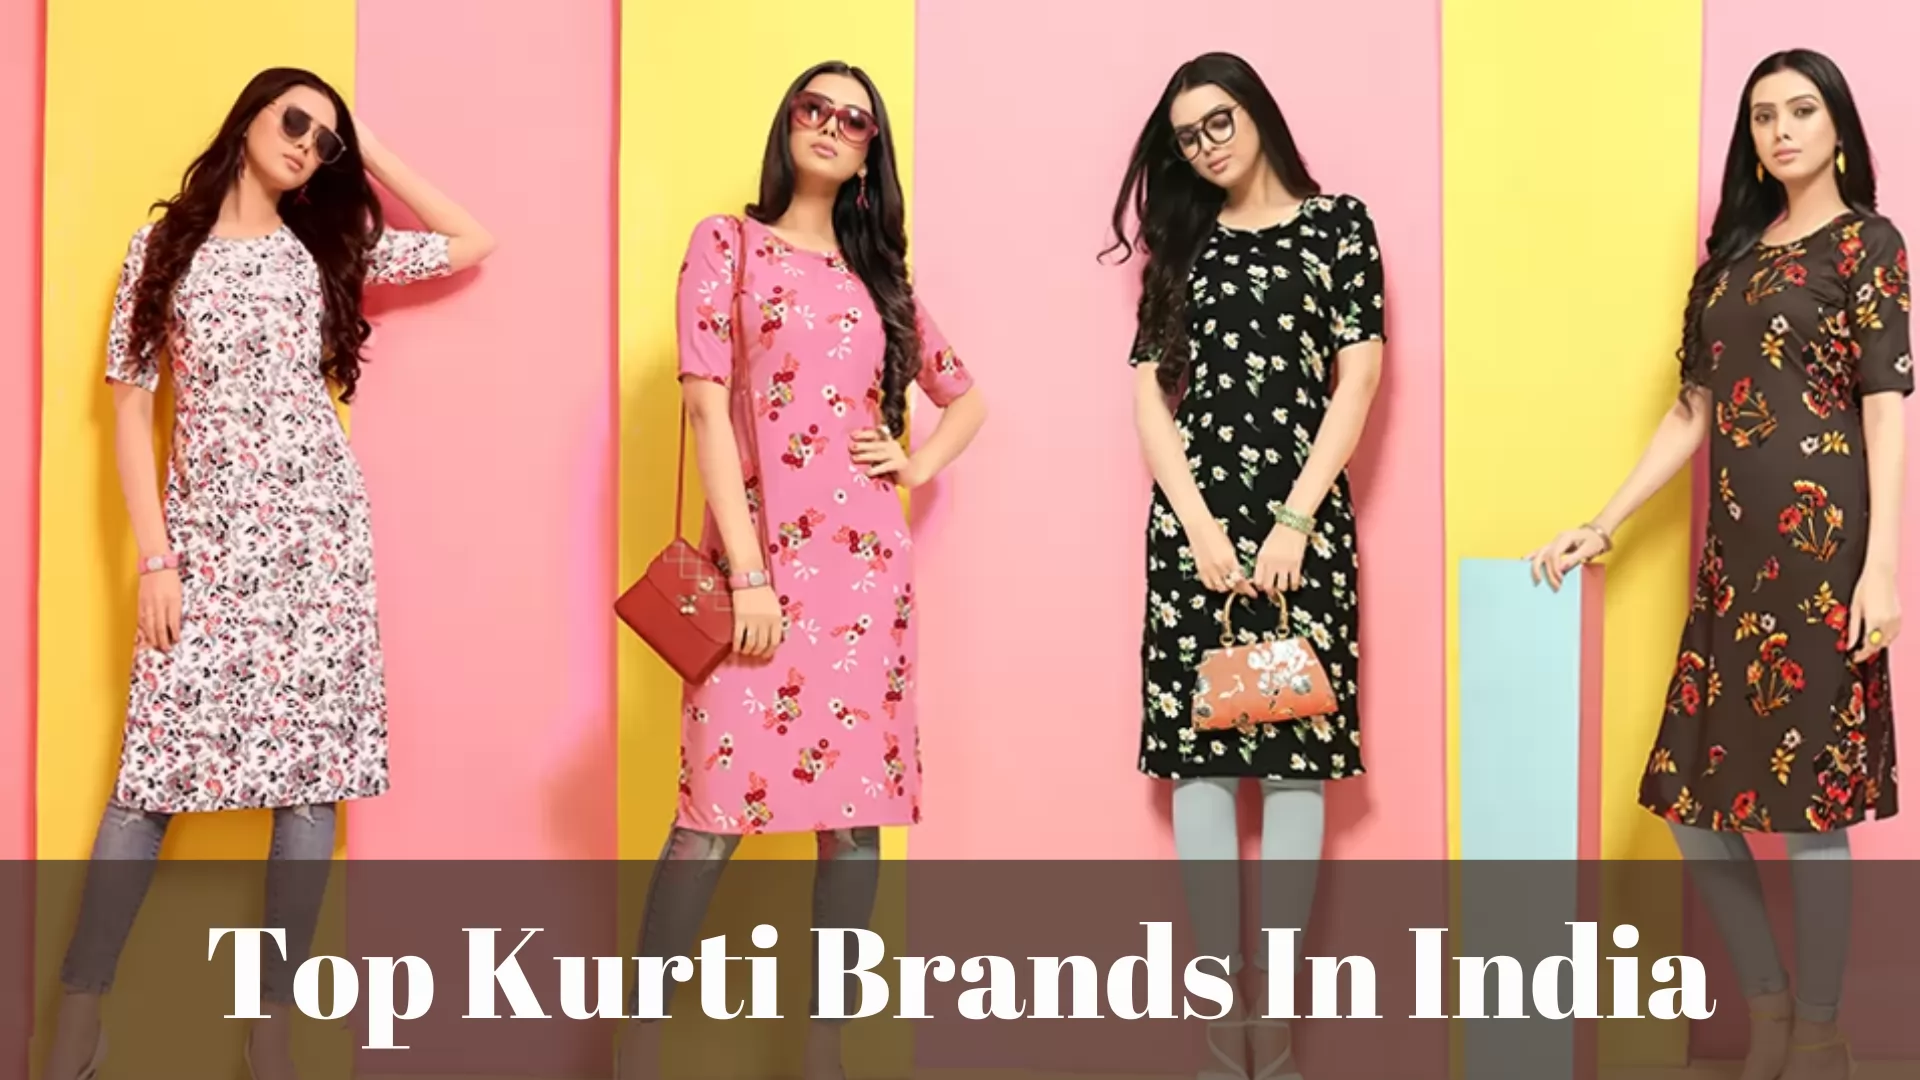 Kurti Captions For Instagram - Perfect Caption For Kurti Pic